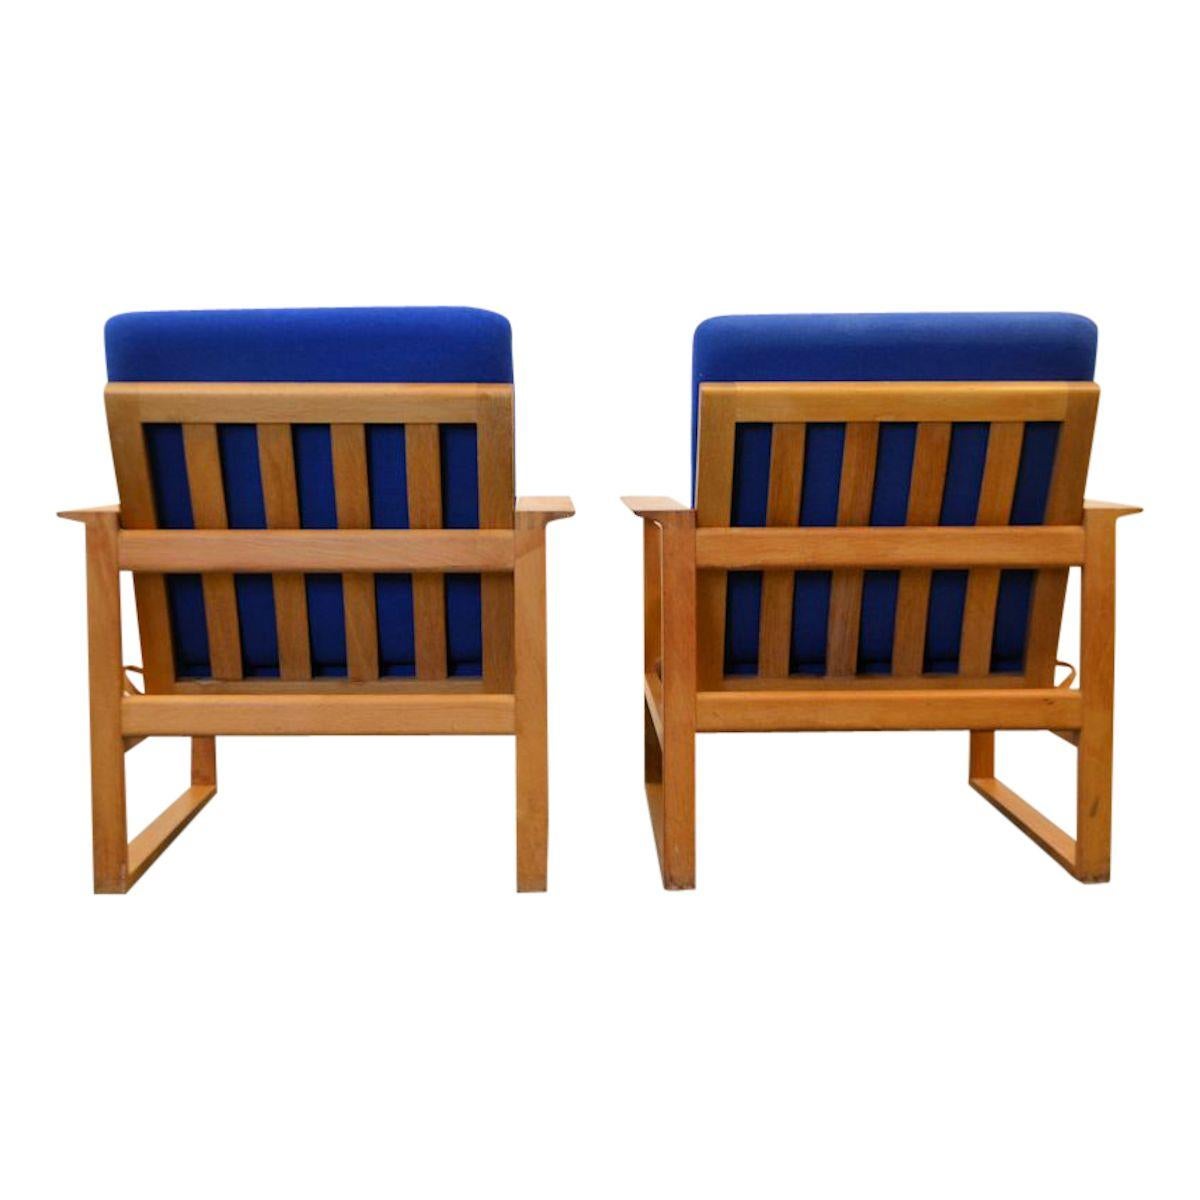 Set of two vintage Danish design lounge chairs designed by worldwide known and appreciated furniture designer Børge Mogensen for manufacturer Fredericia Stolefabrik. Featuring Mogensen was one of the most important among a generation of furniture